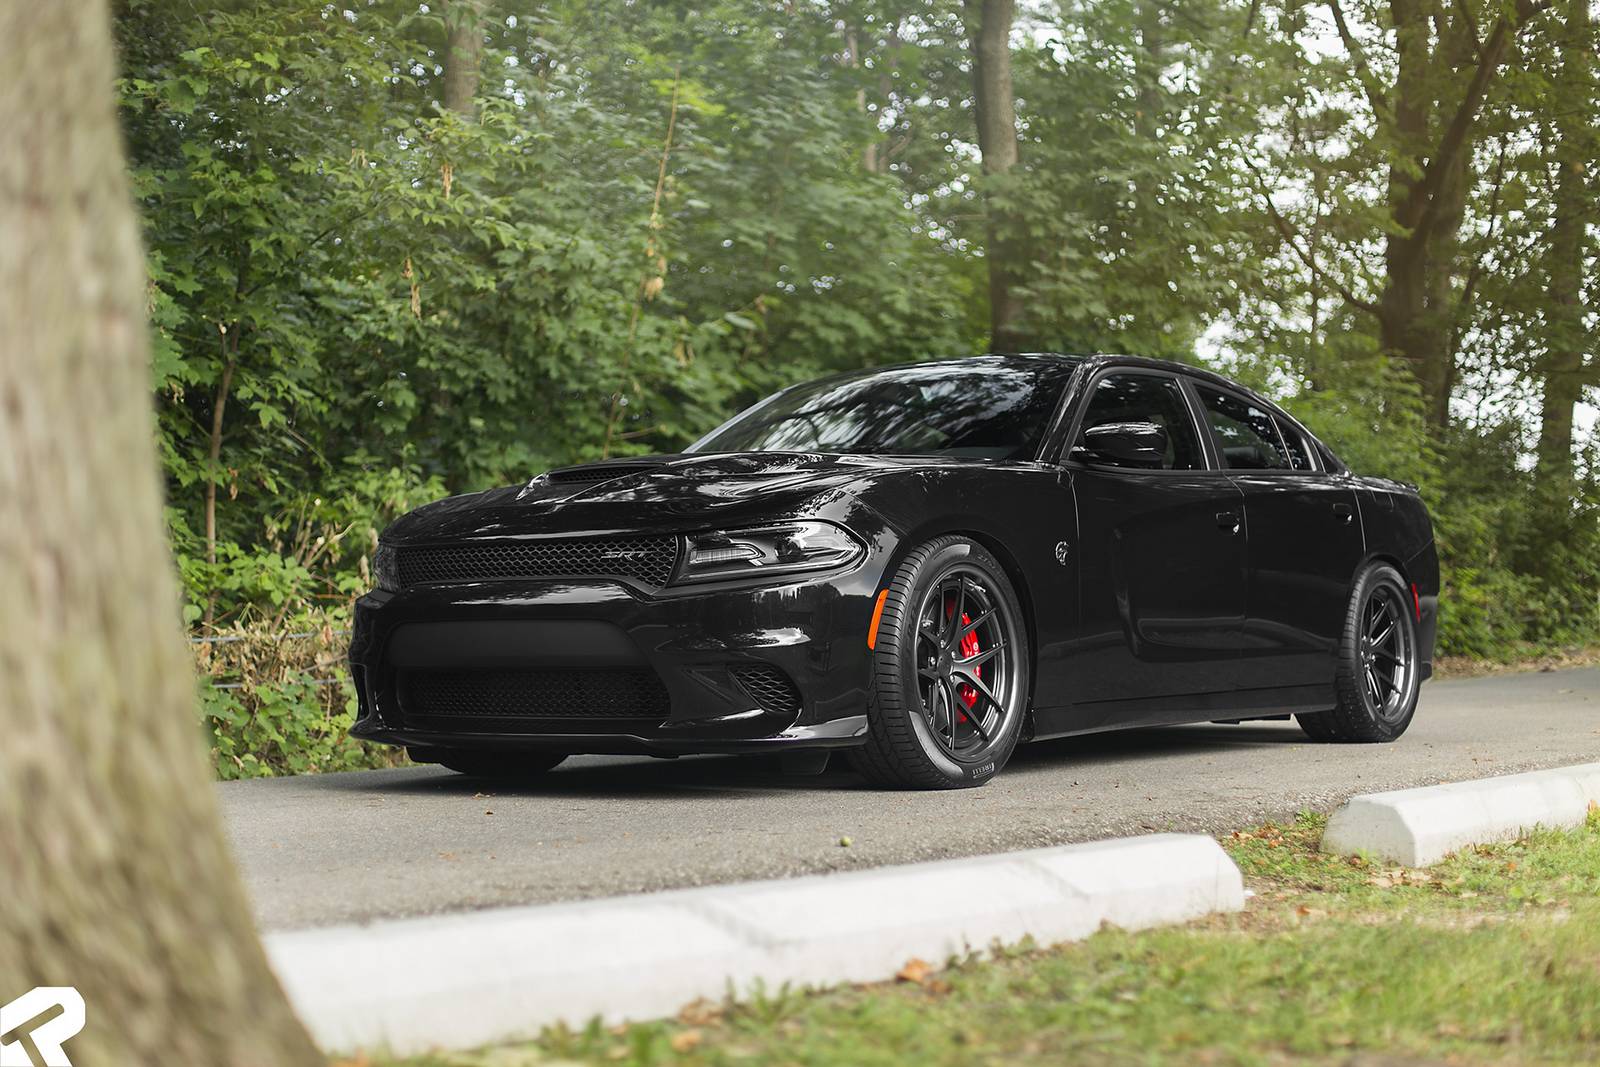 2015 Dodge Charger SRT Hellcat by Pfaff Tuning